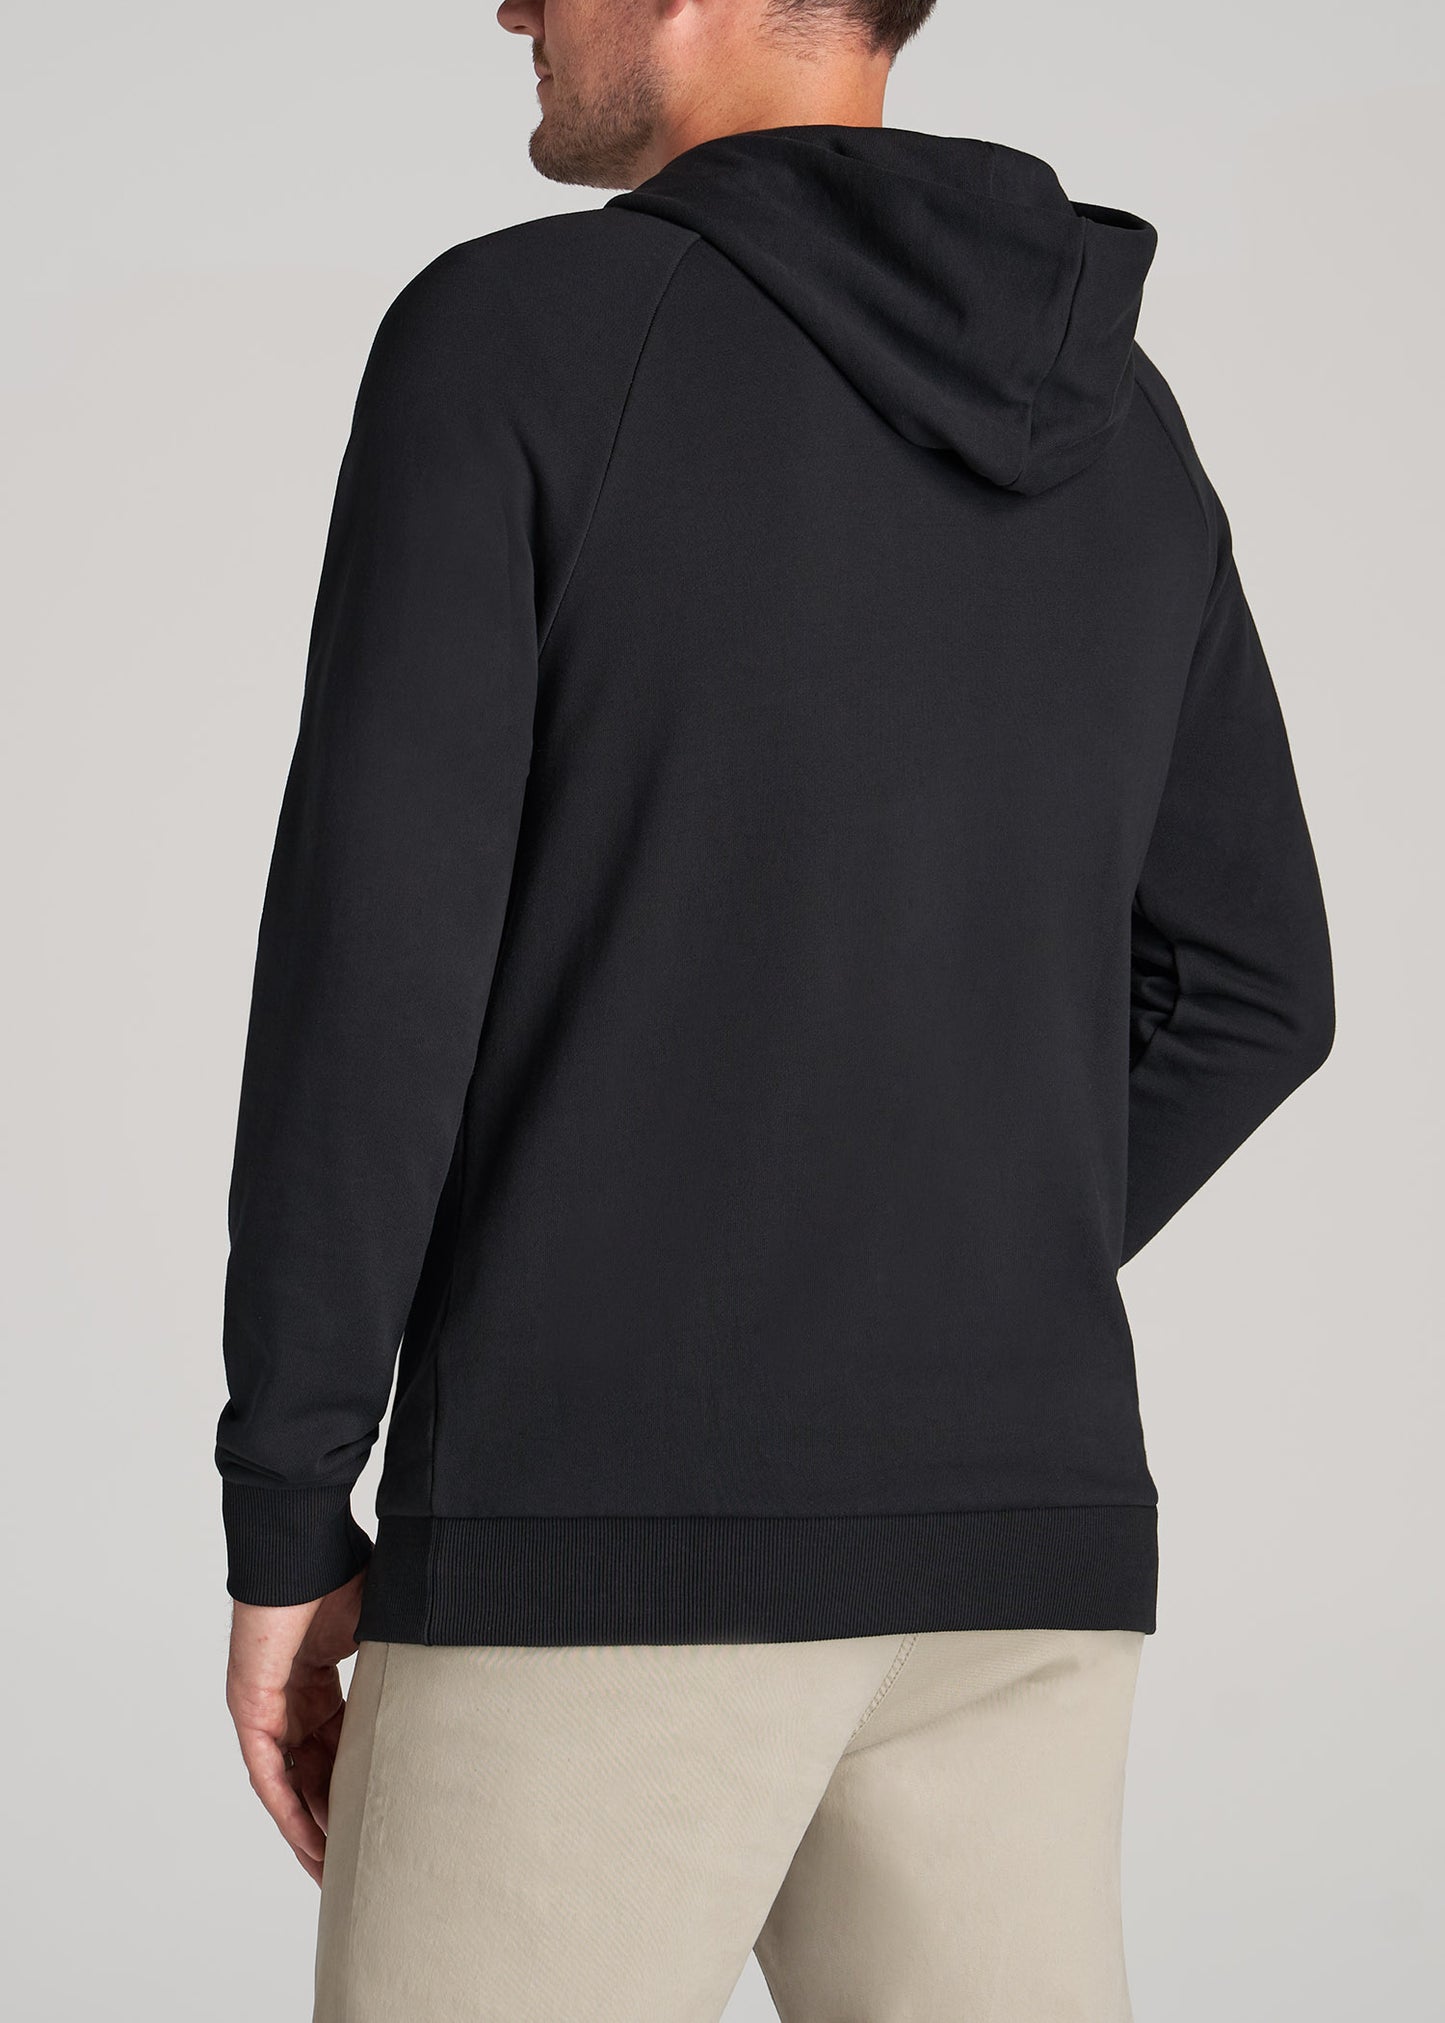 Wearever French Terry Full-Zip Men's Tall Hoodie in Black L / Tall / Black